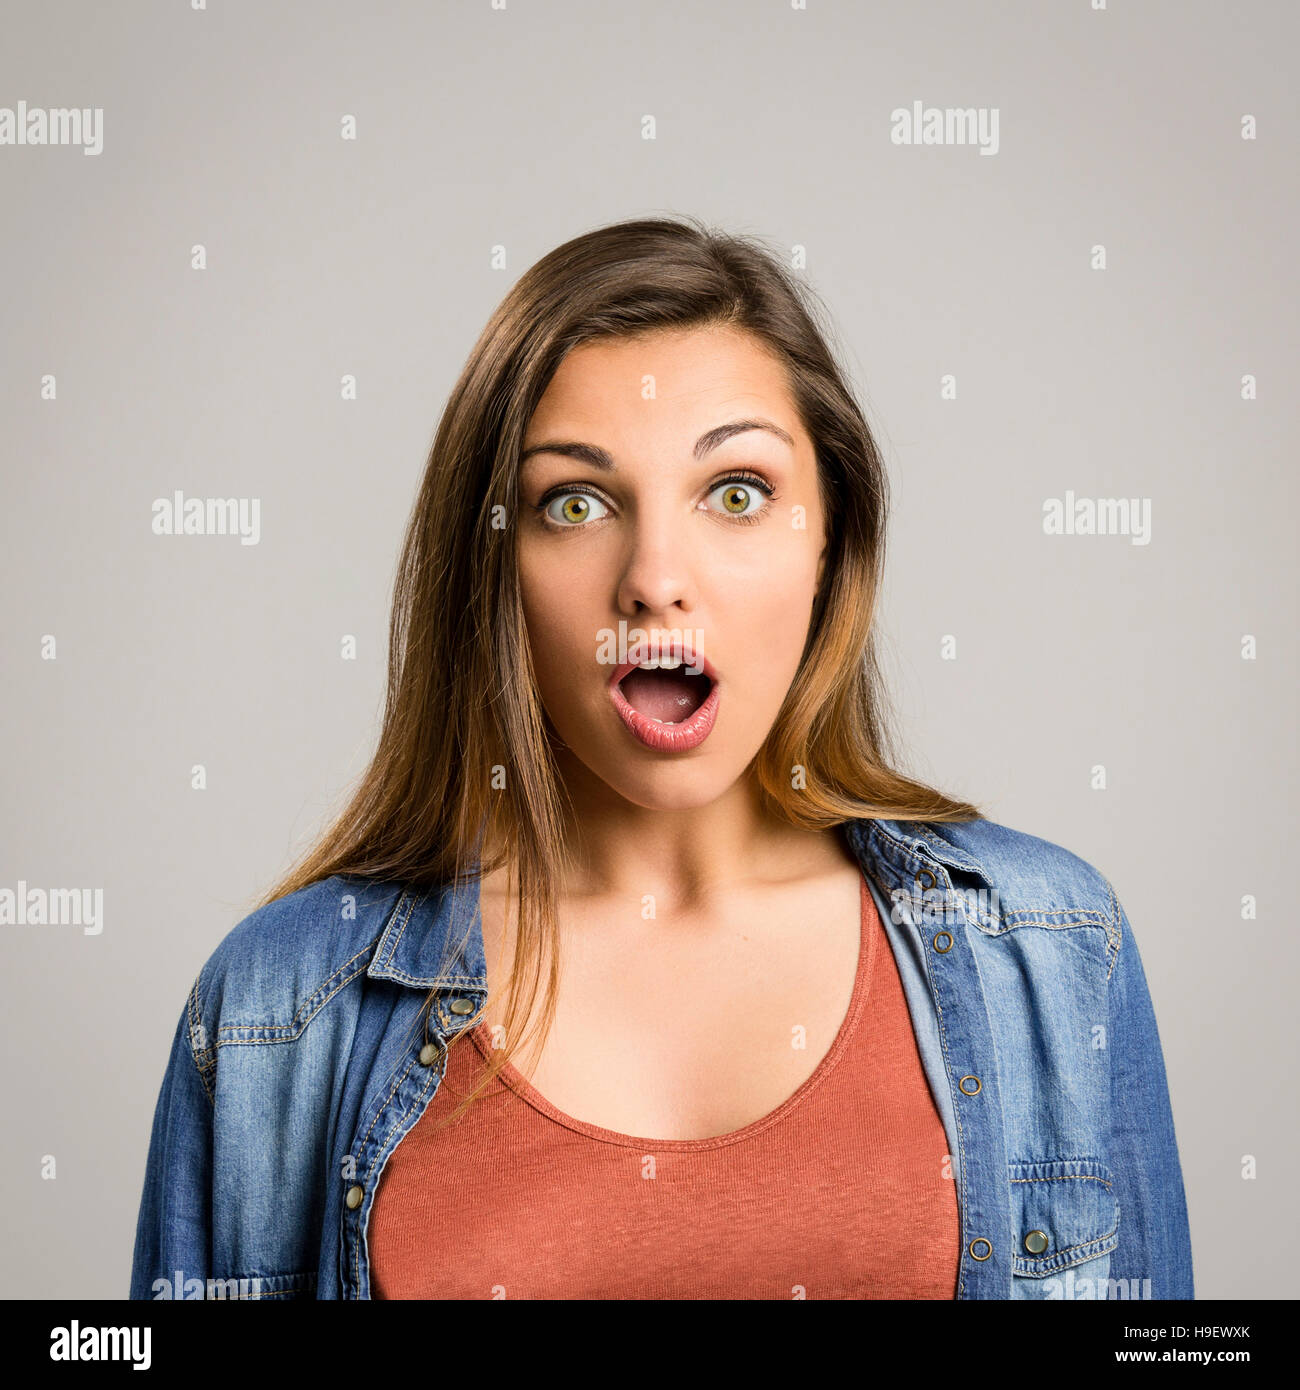 Portrait of a beautiful woman with a surprised face Stock Photo